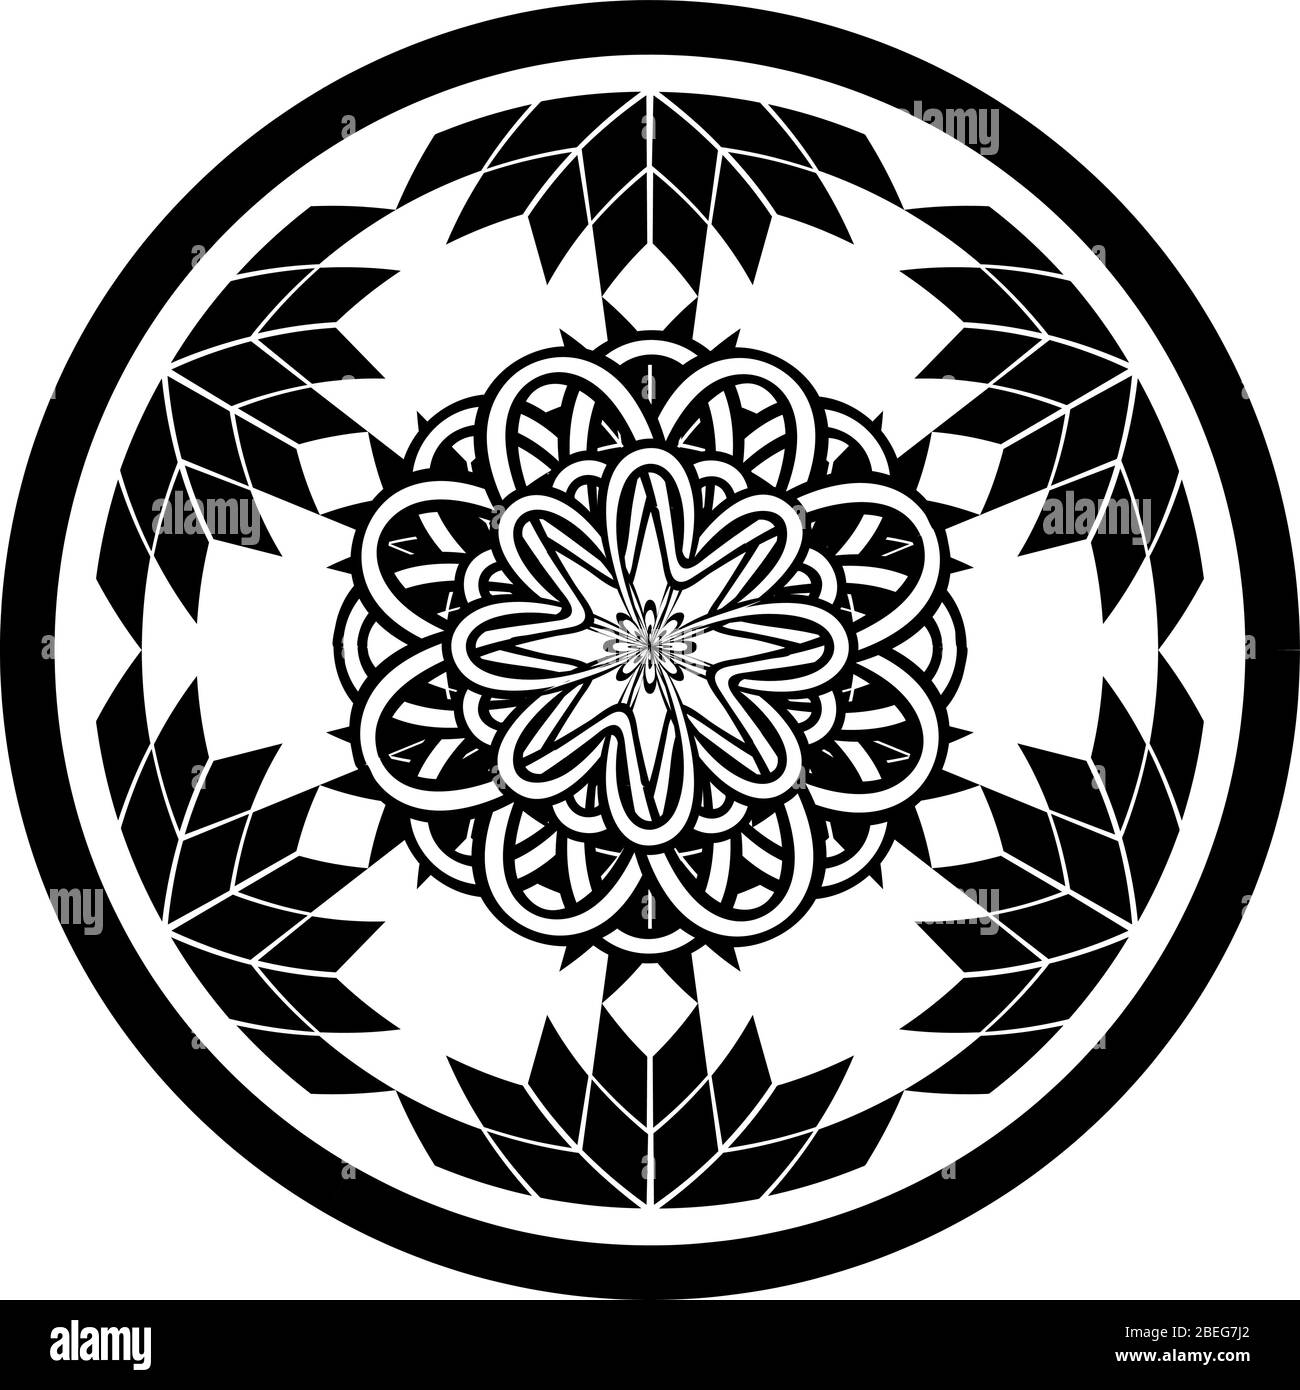 Geometric Tattoo Designs Pattern PNG Images For Free Download - Pngtree